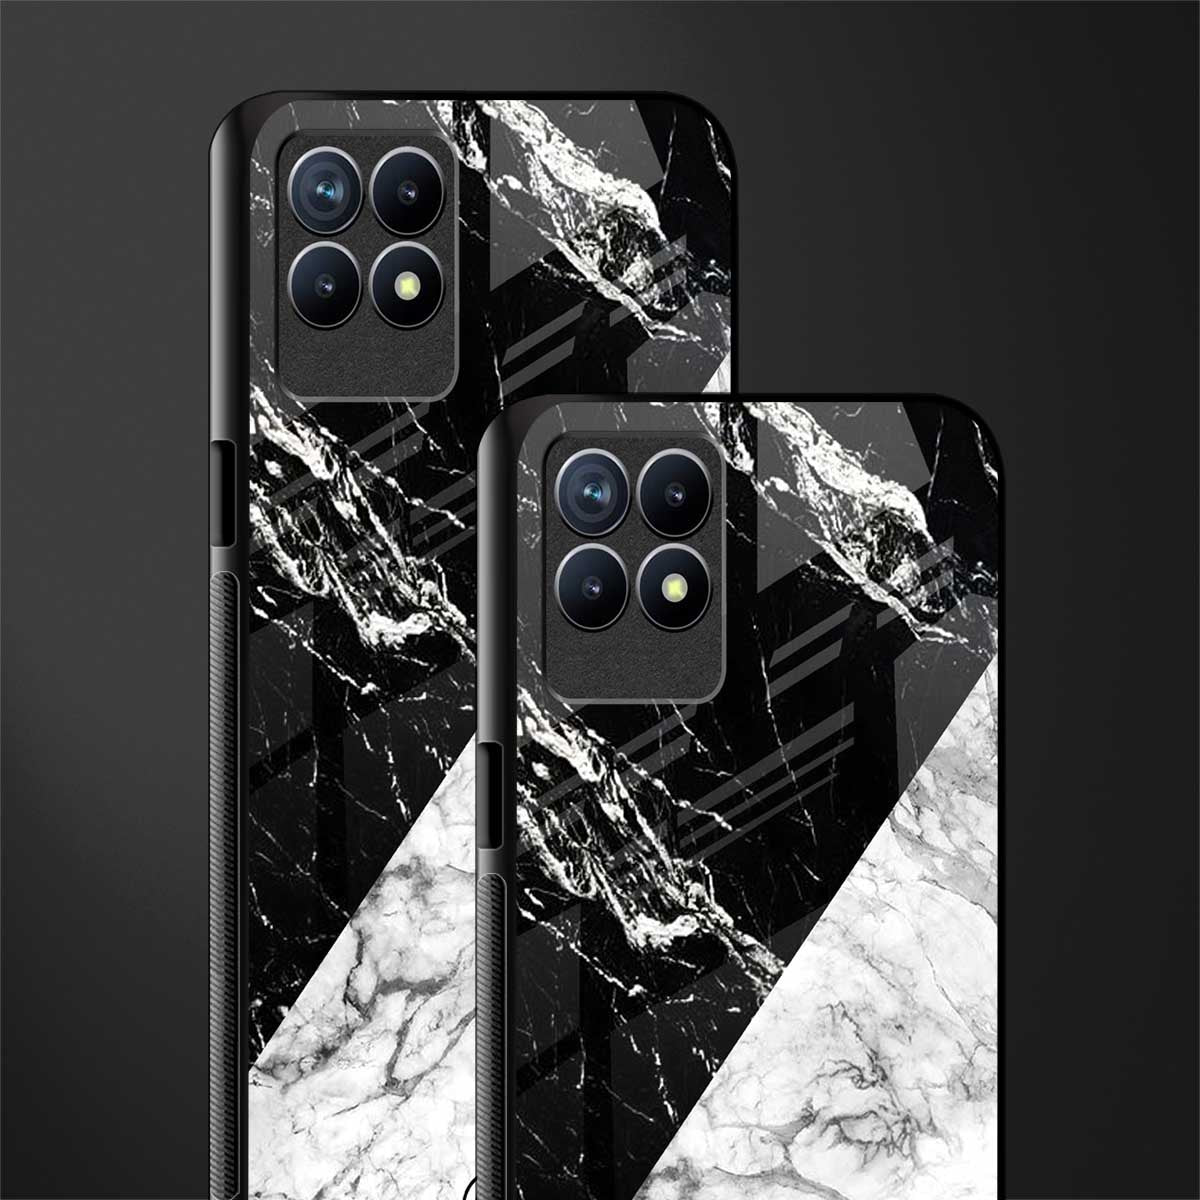 fatal contradiction phone cover for realme 8i